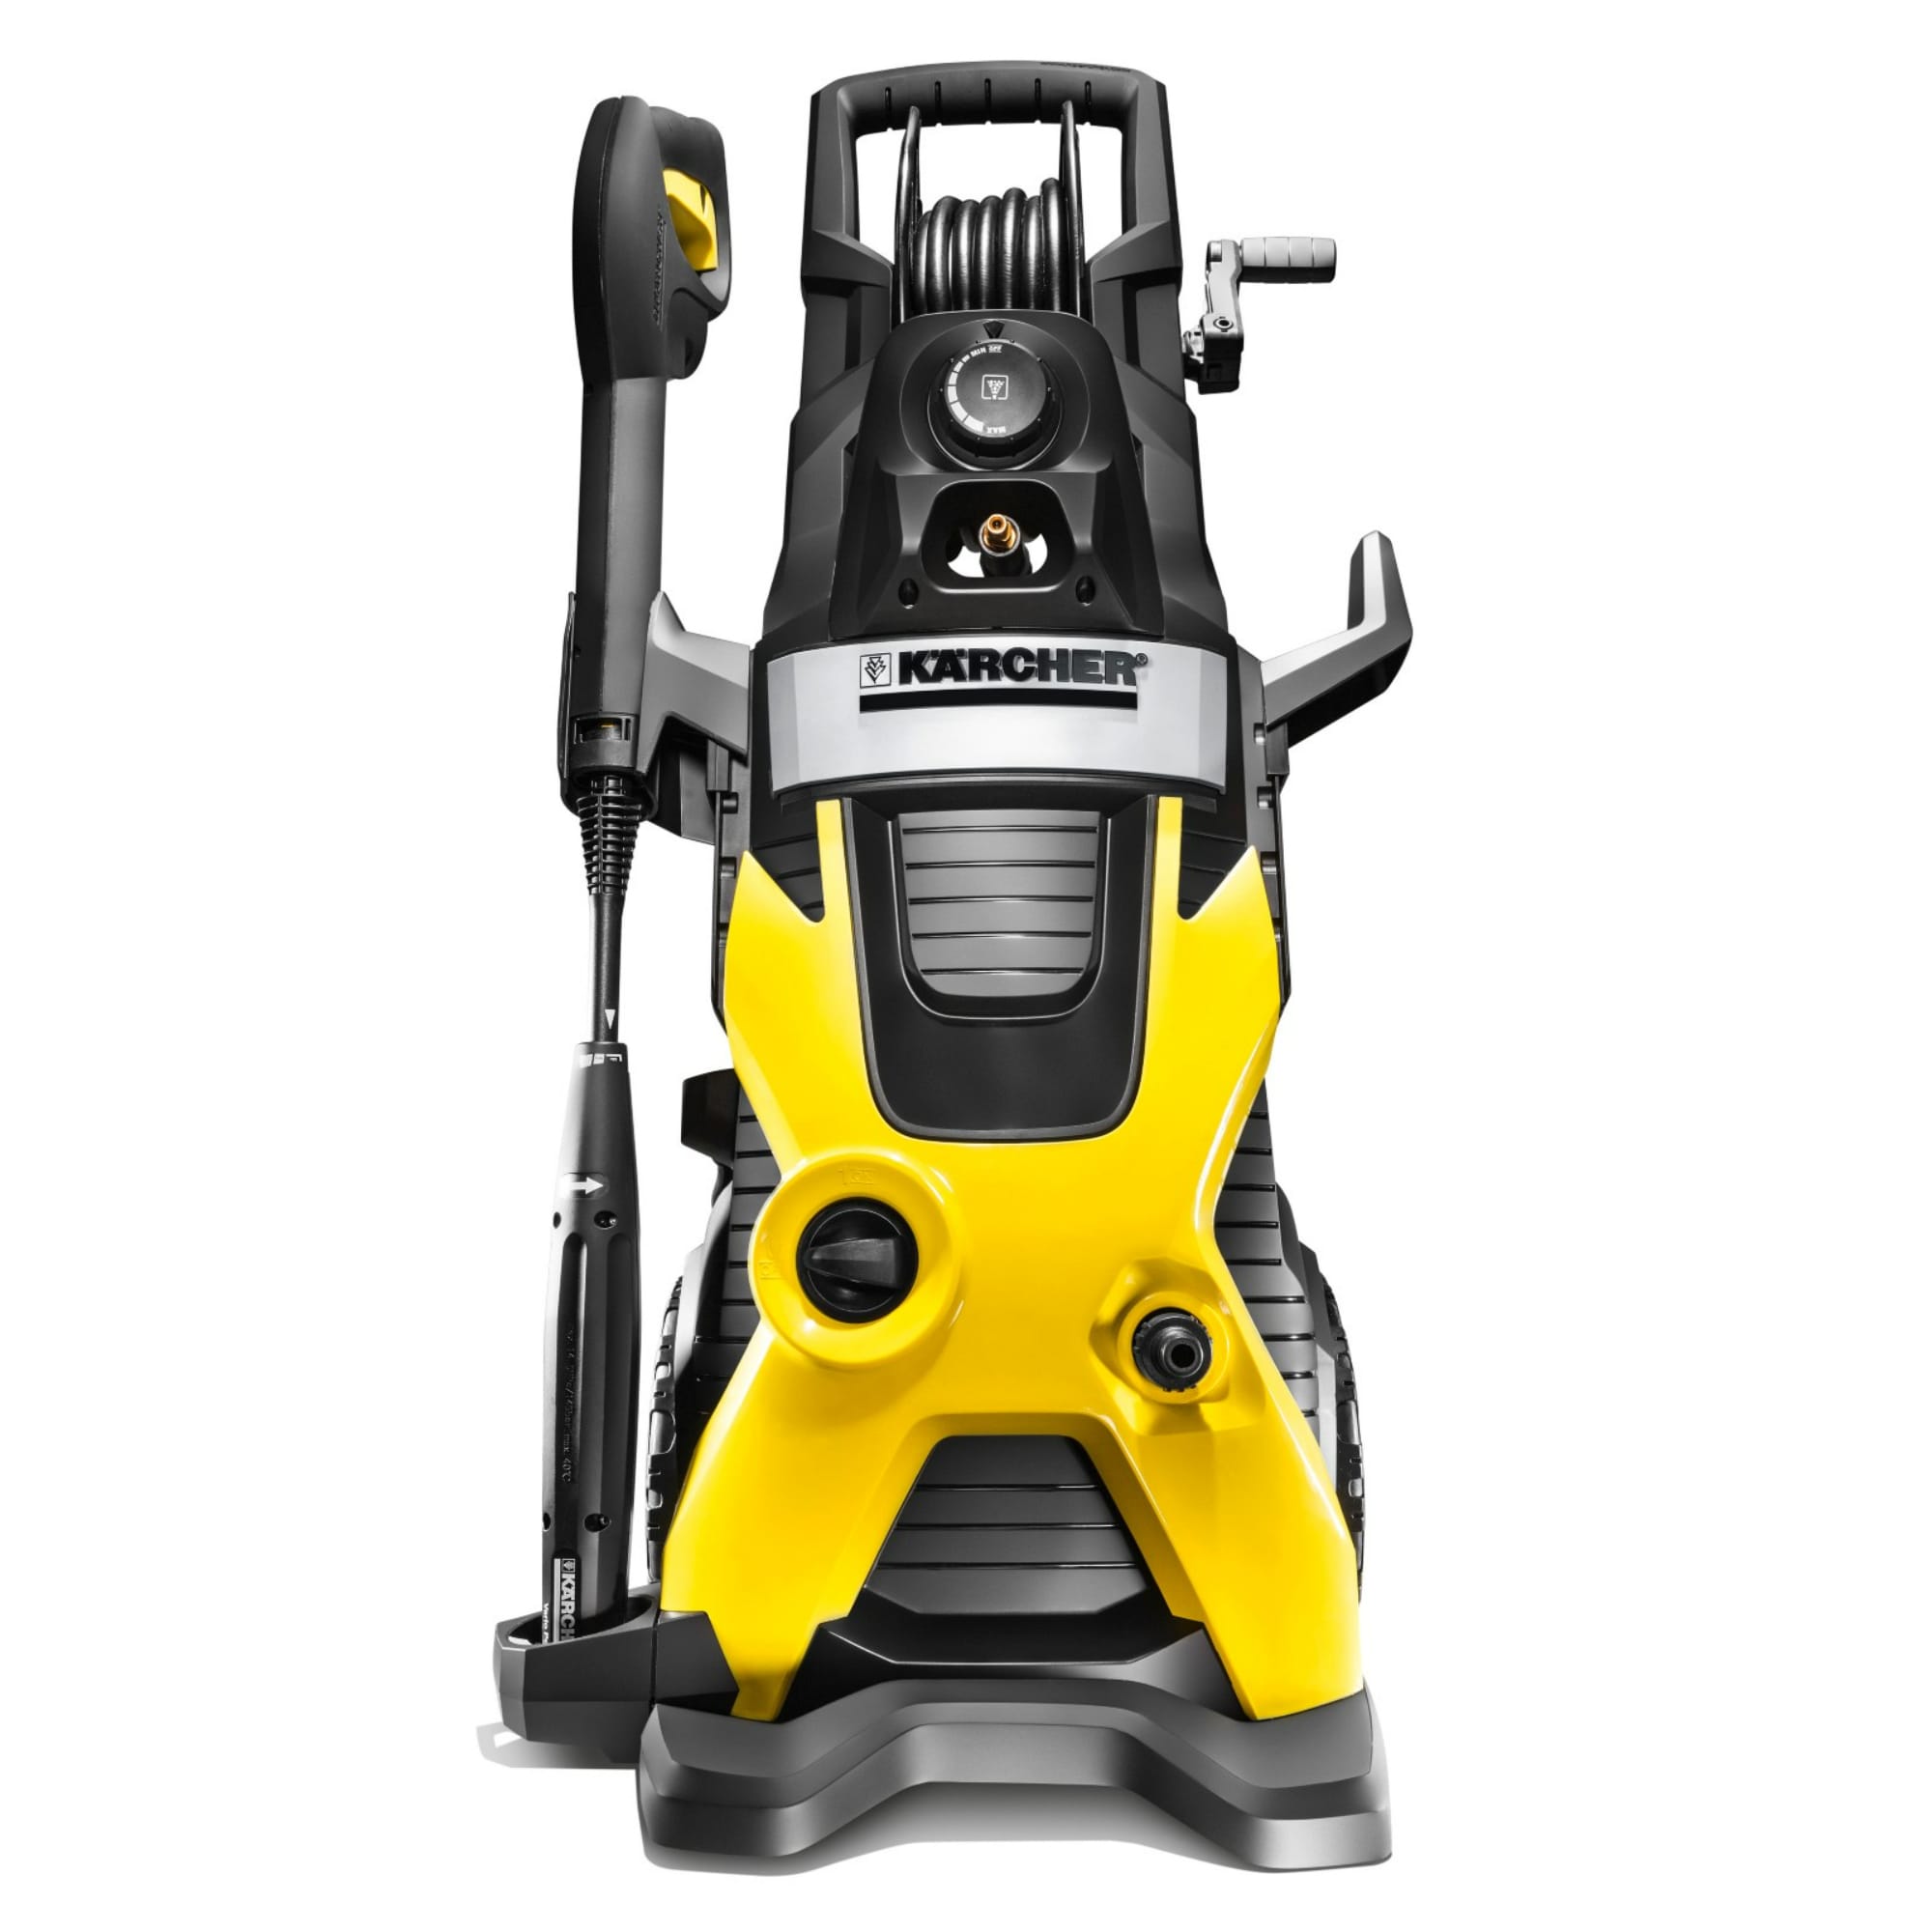 Karcher K5 Premium 2000 PSI 1.4-Gallons Cold Water Electric Pressure Washer